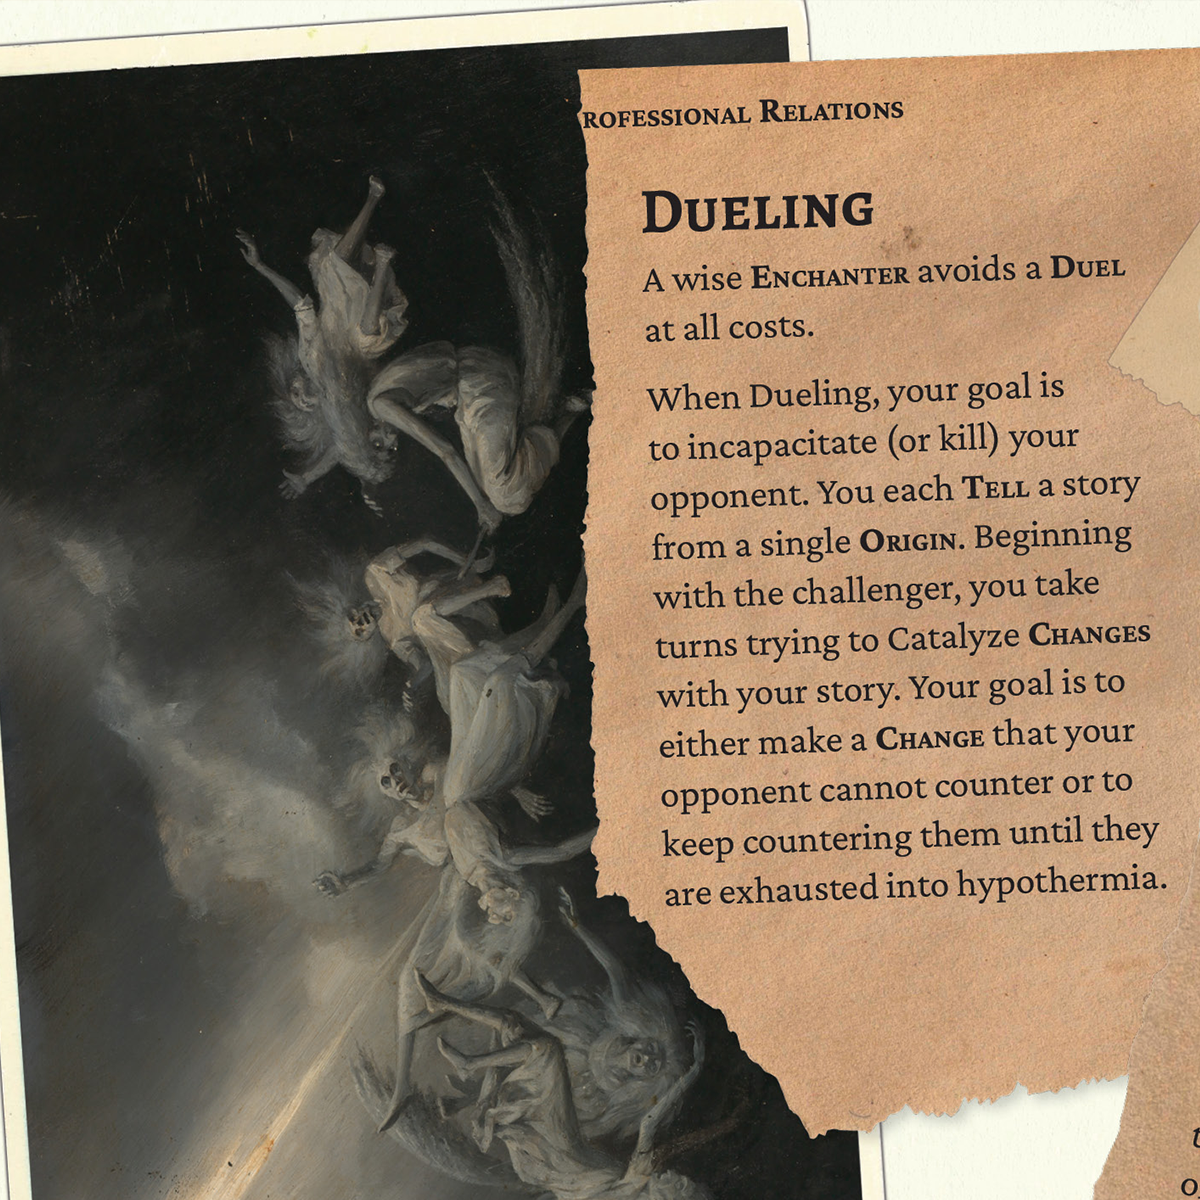 A scan of an old postcard, depicting elderly women tumbling through dark stormy skies. A scrap of paper reads: Dueling A wise Enchanter avoids a Duel at all costs.  When Dueling, your goal is to incapacitate (or kill) your opponent. You each Tell a story from a single Origin. Beginning with the challenger, you take turns trying to Catalyze Changes with your story. Your goal is to either make a Change that your opponent cannot counter or to keep countering them until they are exhausted into hypothermia. 